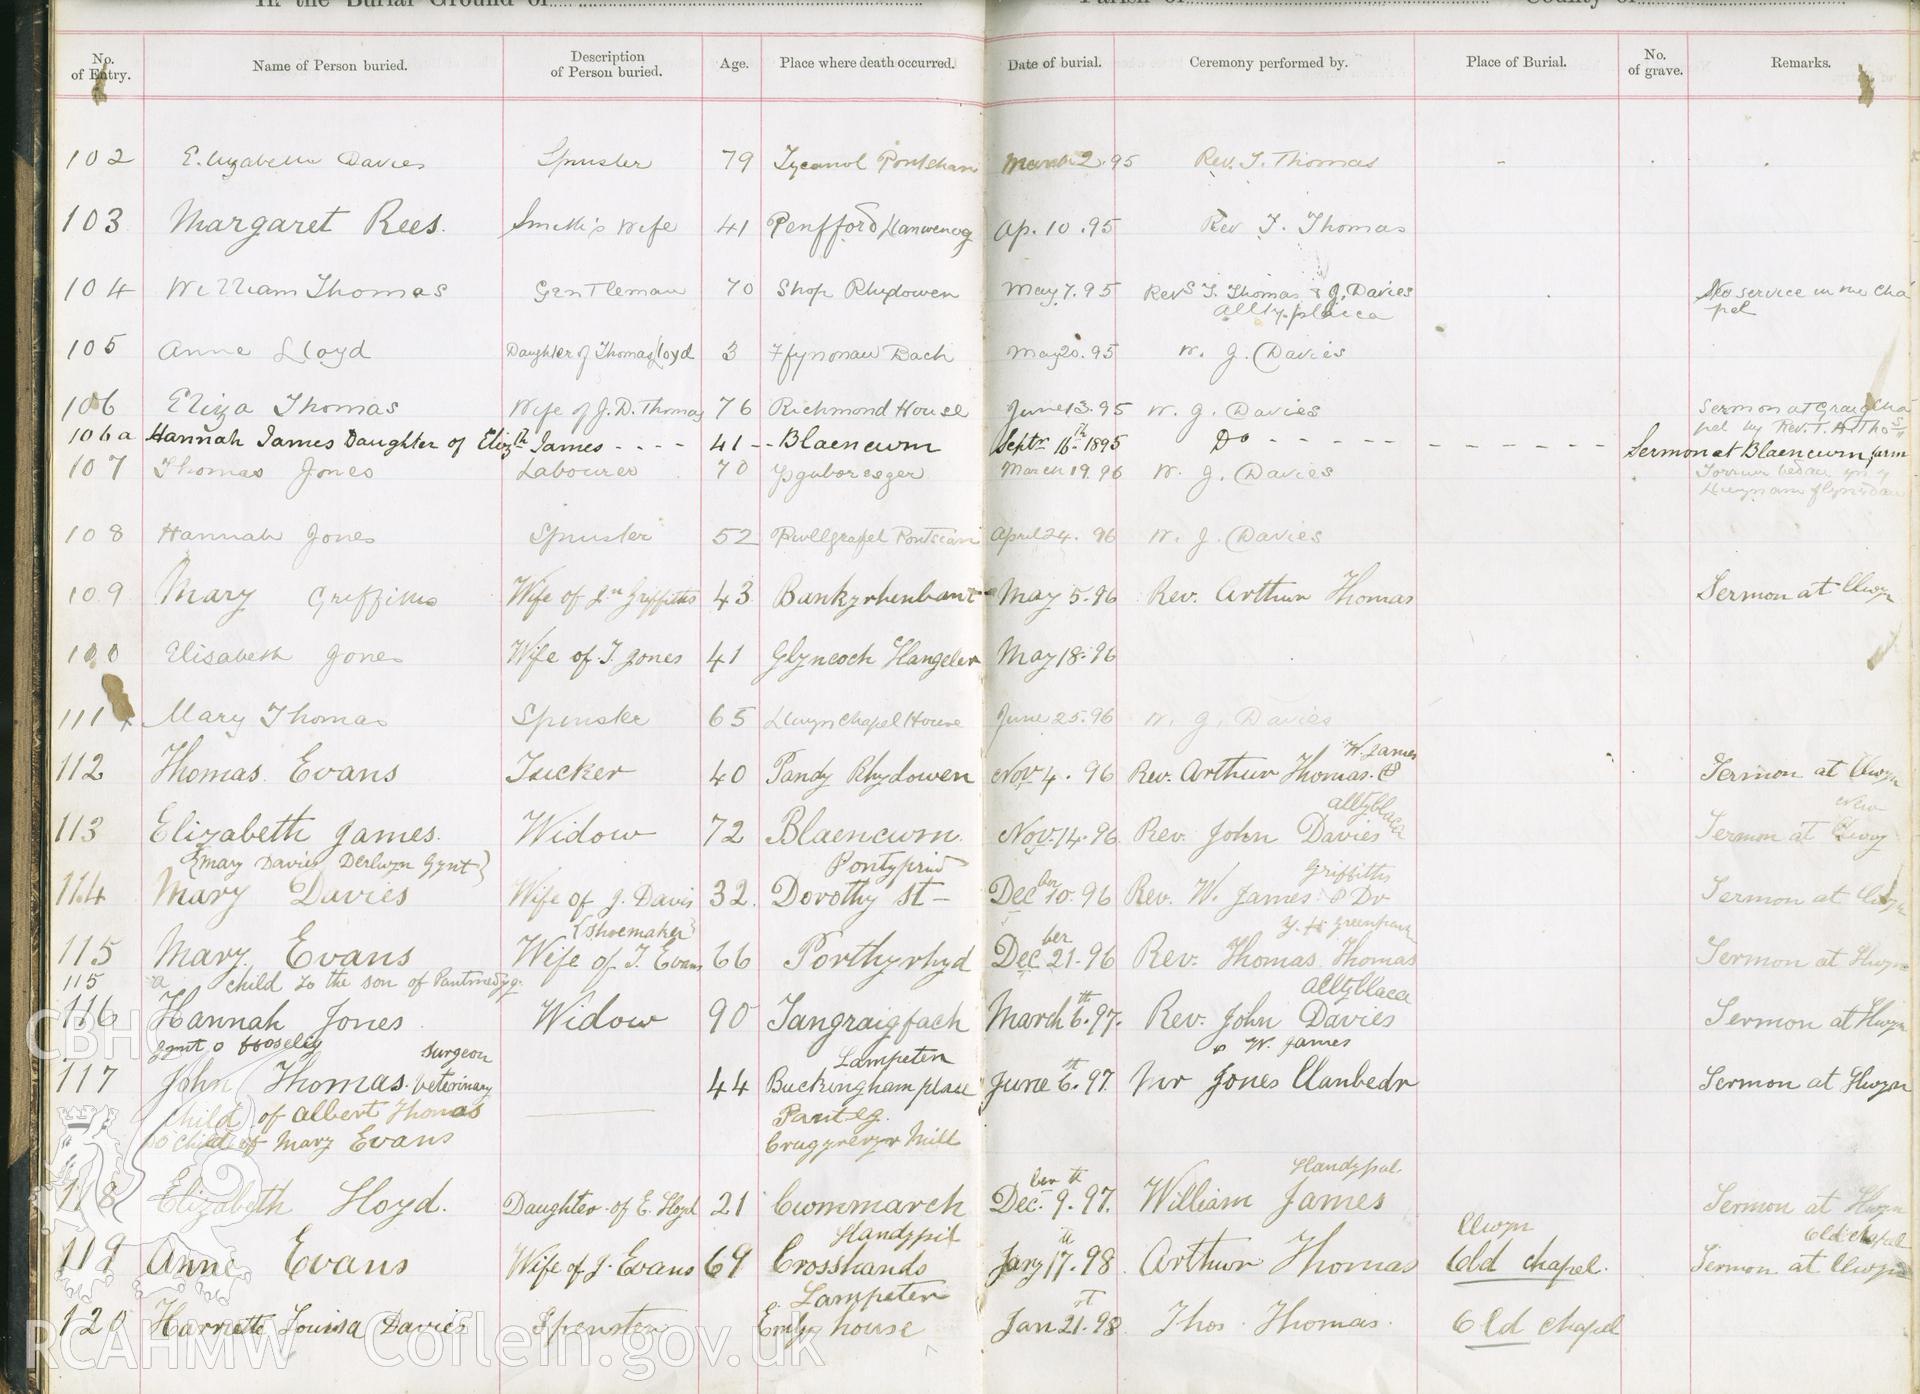 Scanned copy of handwritten burial register at Llwydrhydowen New Chapel and old chapel from 2nd March 1895 to 21st January 1898. Donated to the RCAHMW as part of the Digital Dissent Project.